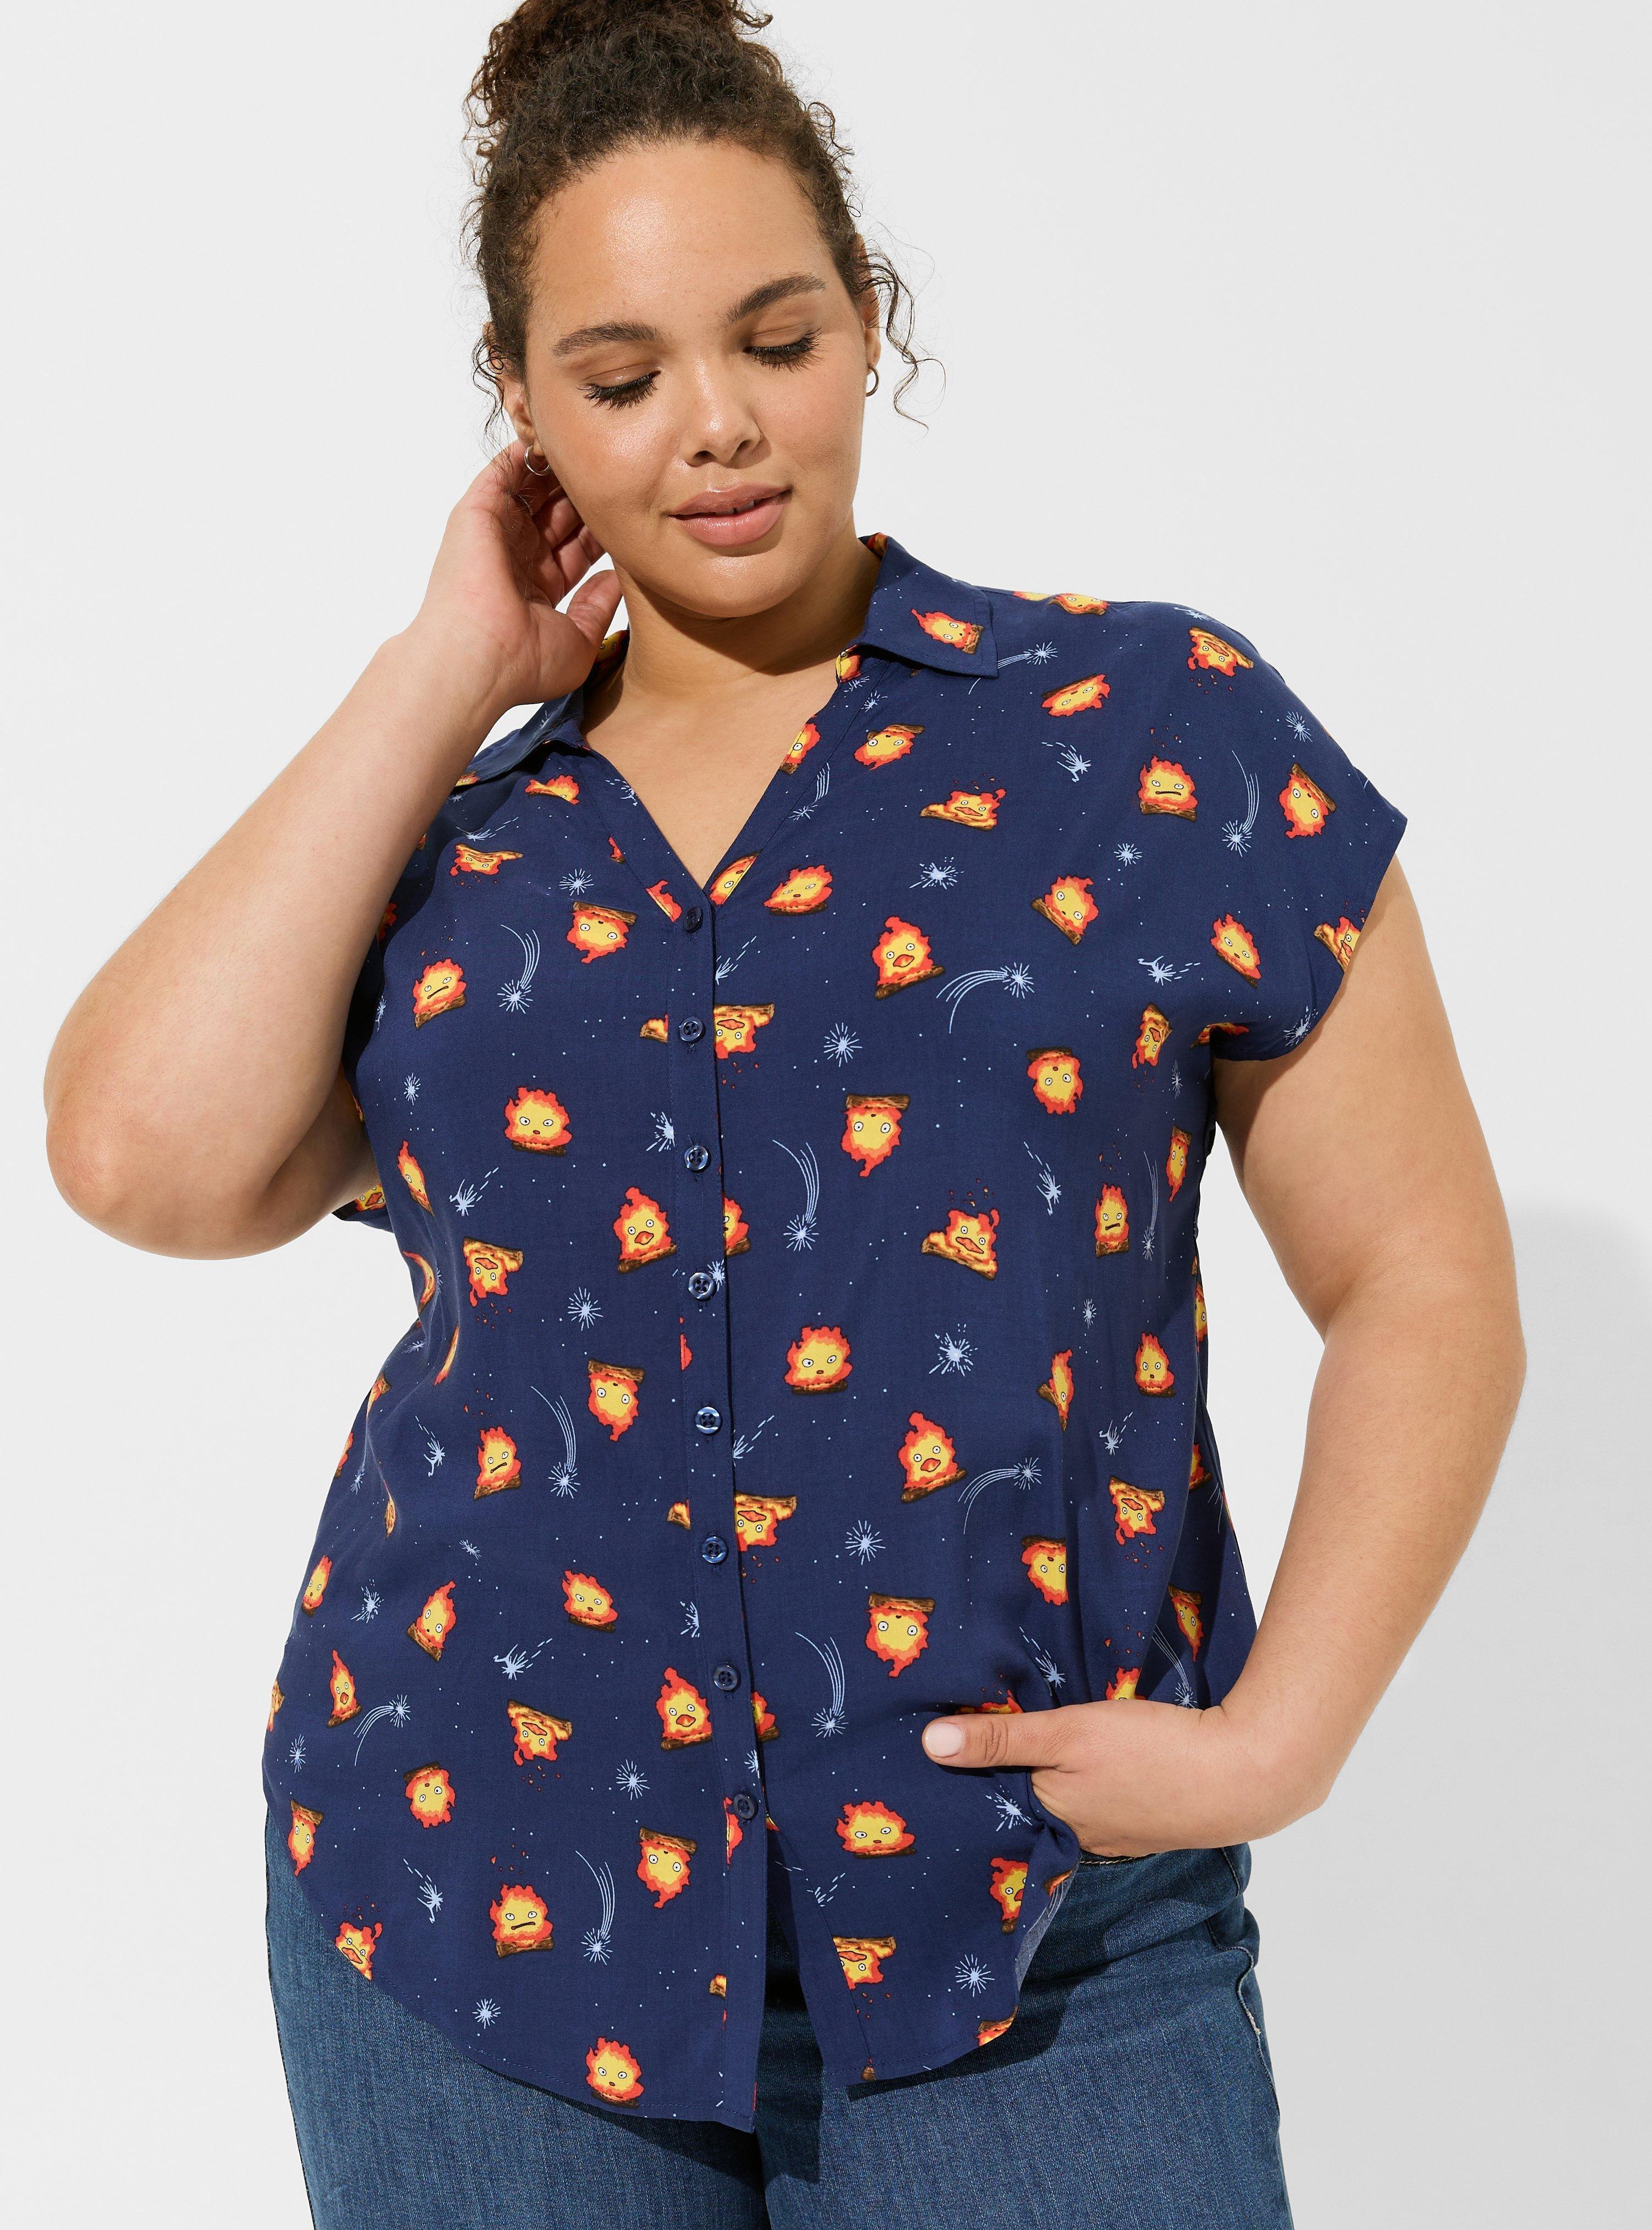 Torrid - It's the little extra details on our tops - like these  cute-as-can-be buttons - that set us apart. 👚 Shop Tops